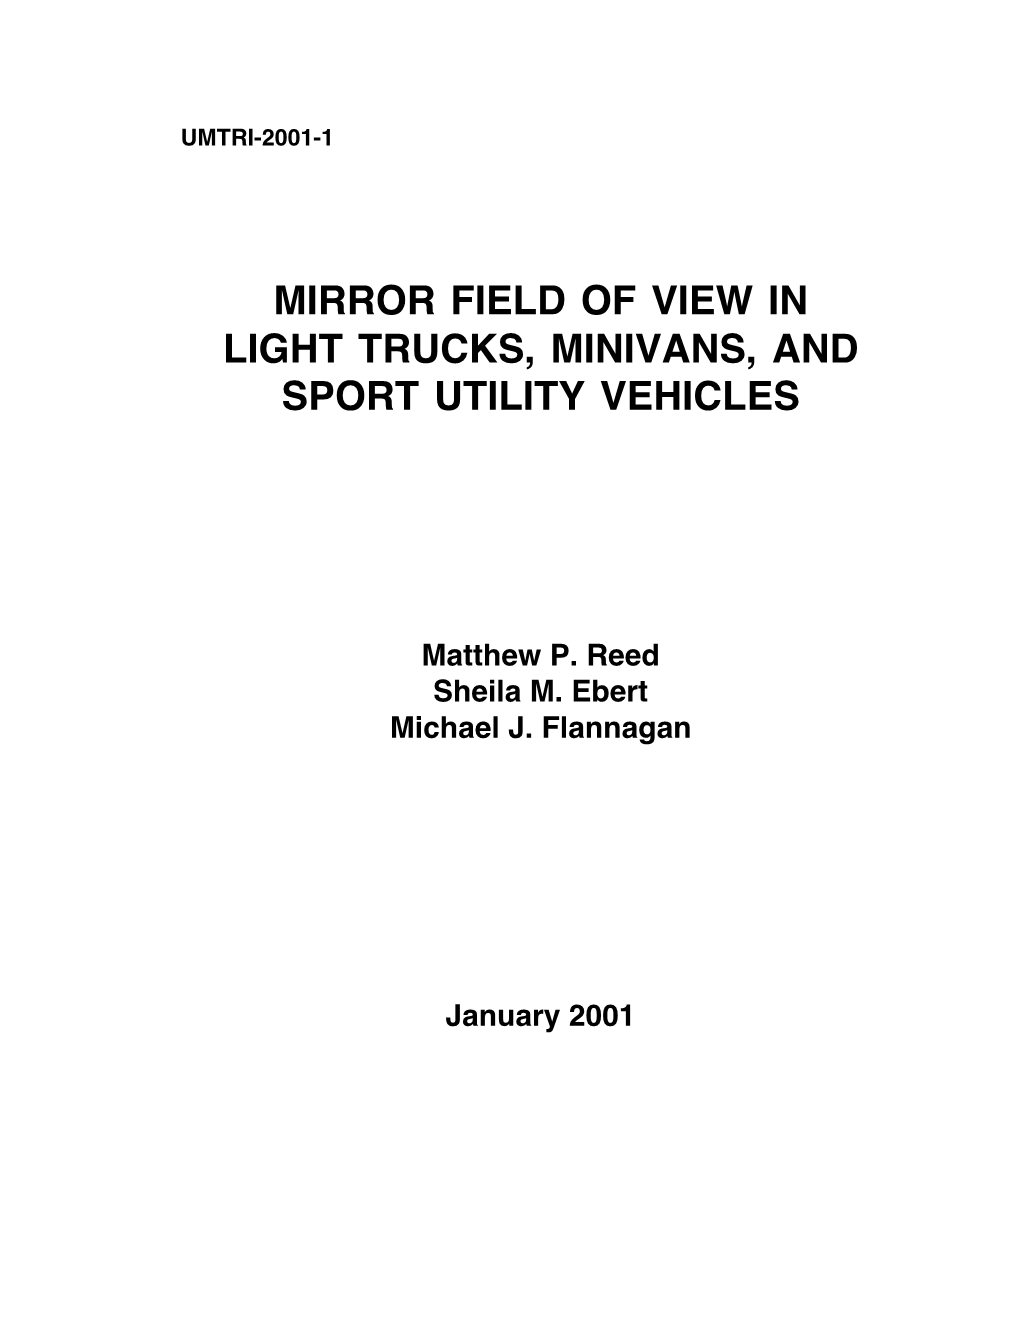 Mirror Field of View in Light Trucks, Minivans, and Sport Utility Vehicles January 2001 6